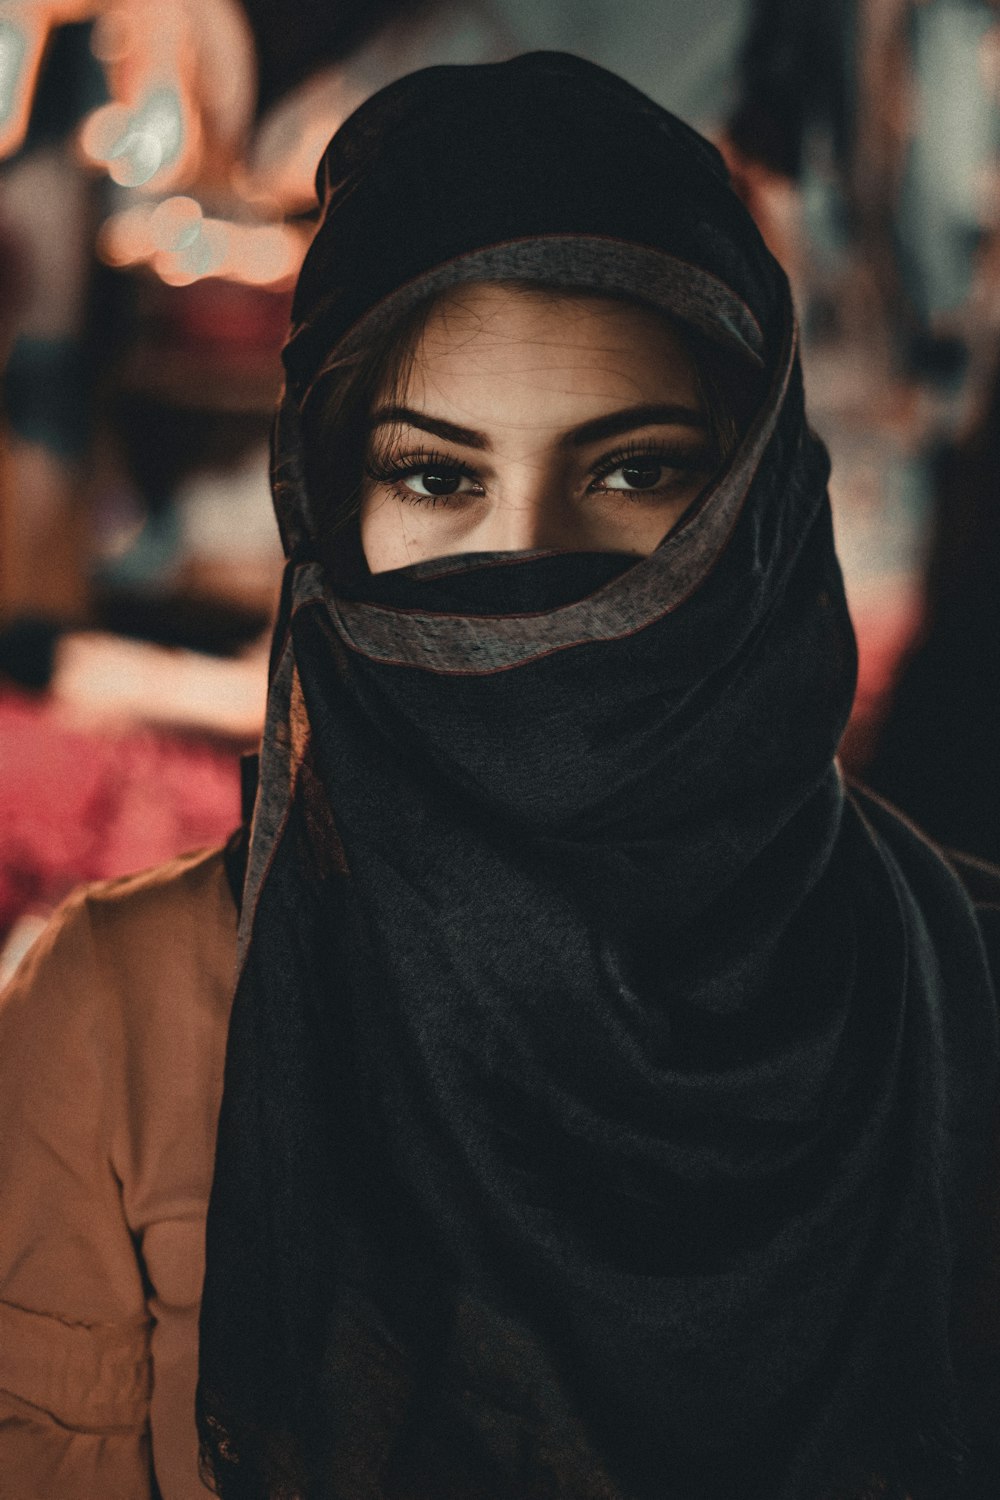 Download Hijab Women Pictures Download Free Images On Unsplash